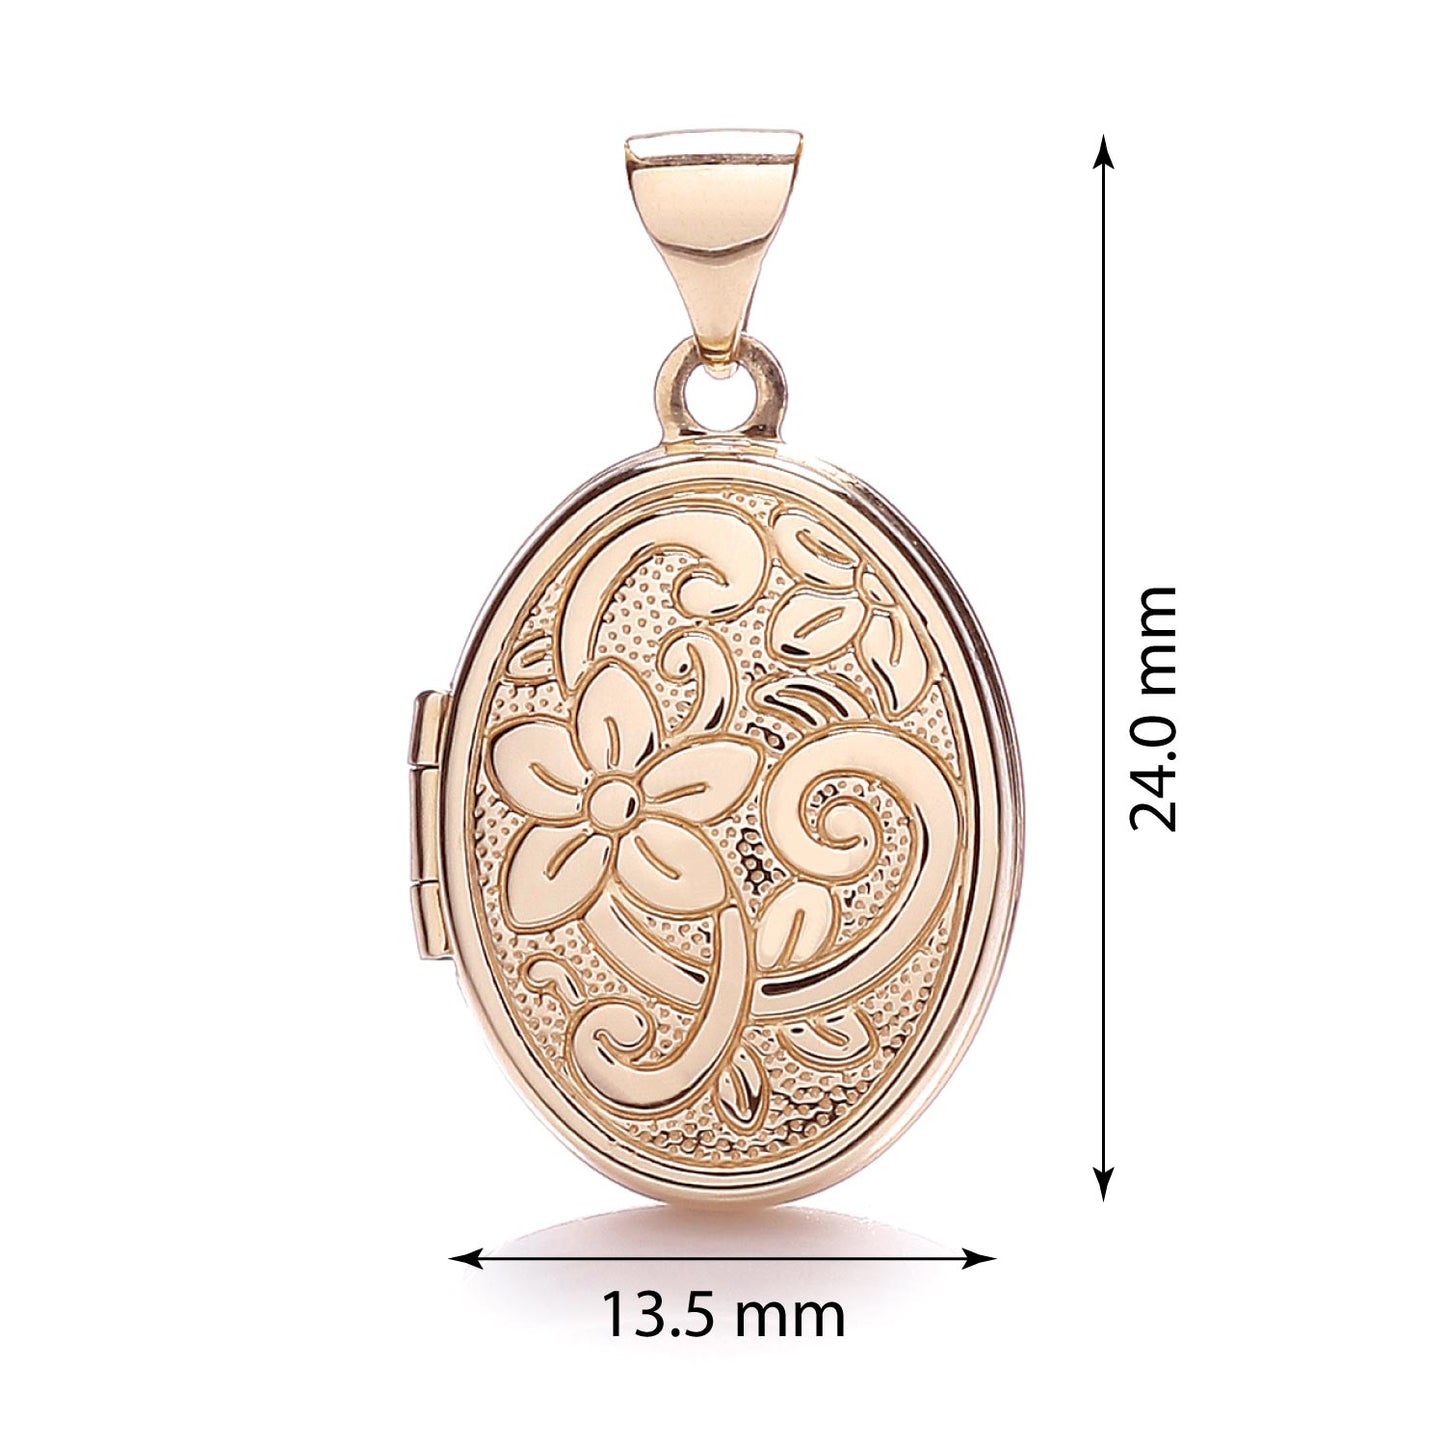 9ct Solid Gold Oval Shaped Patterned Locket 118028